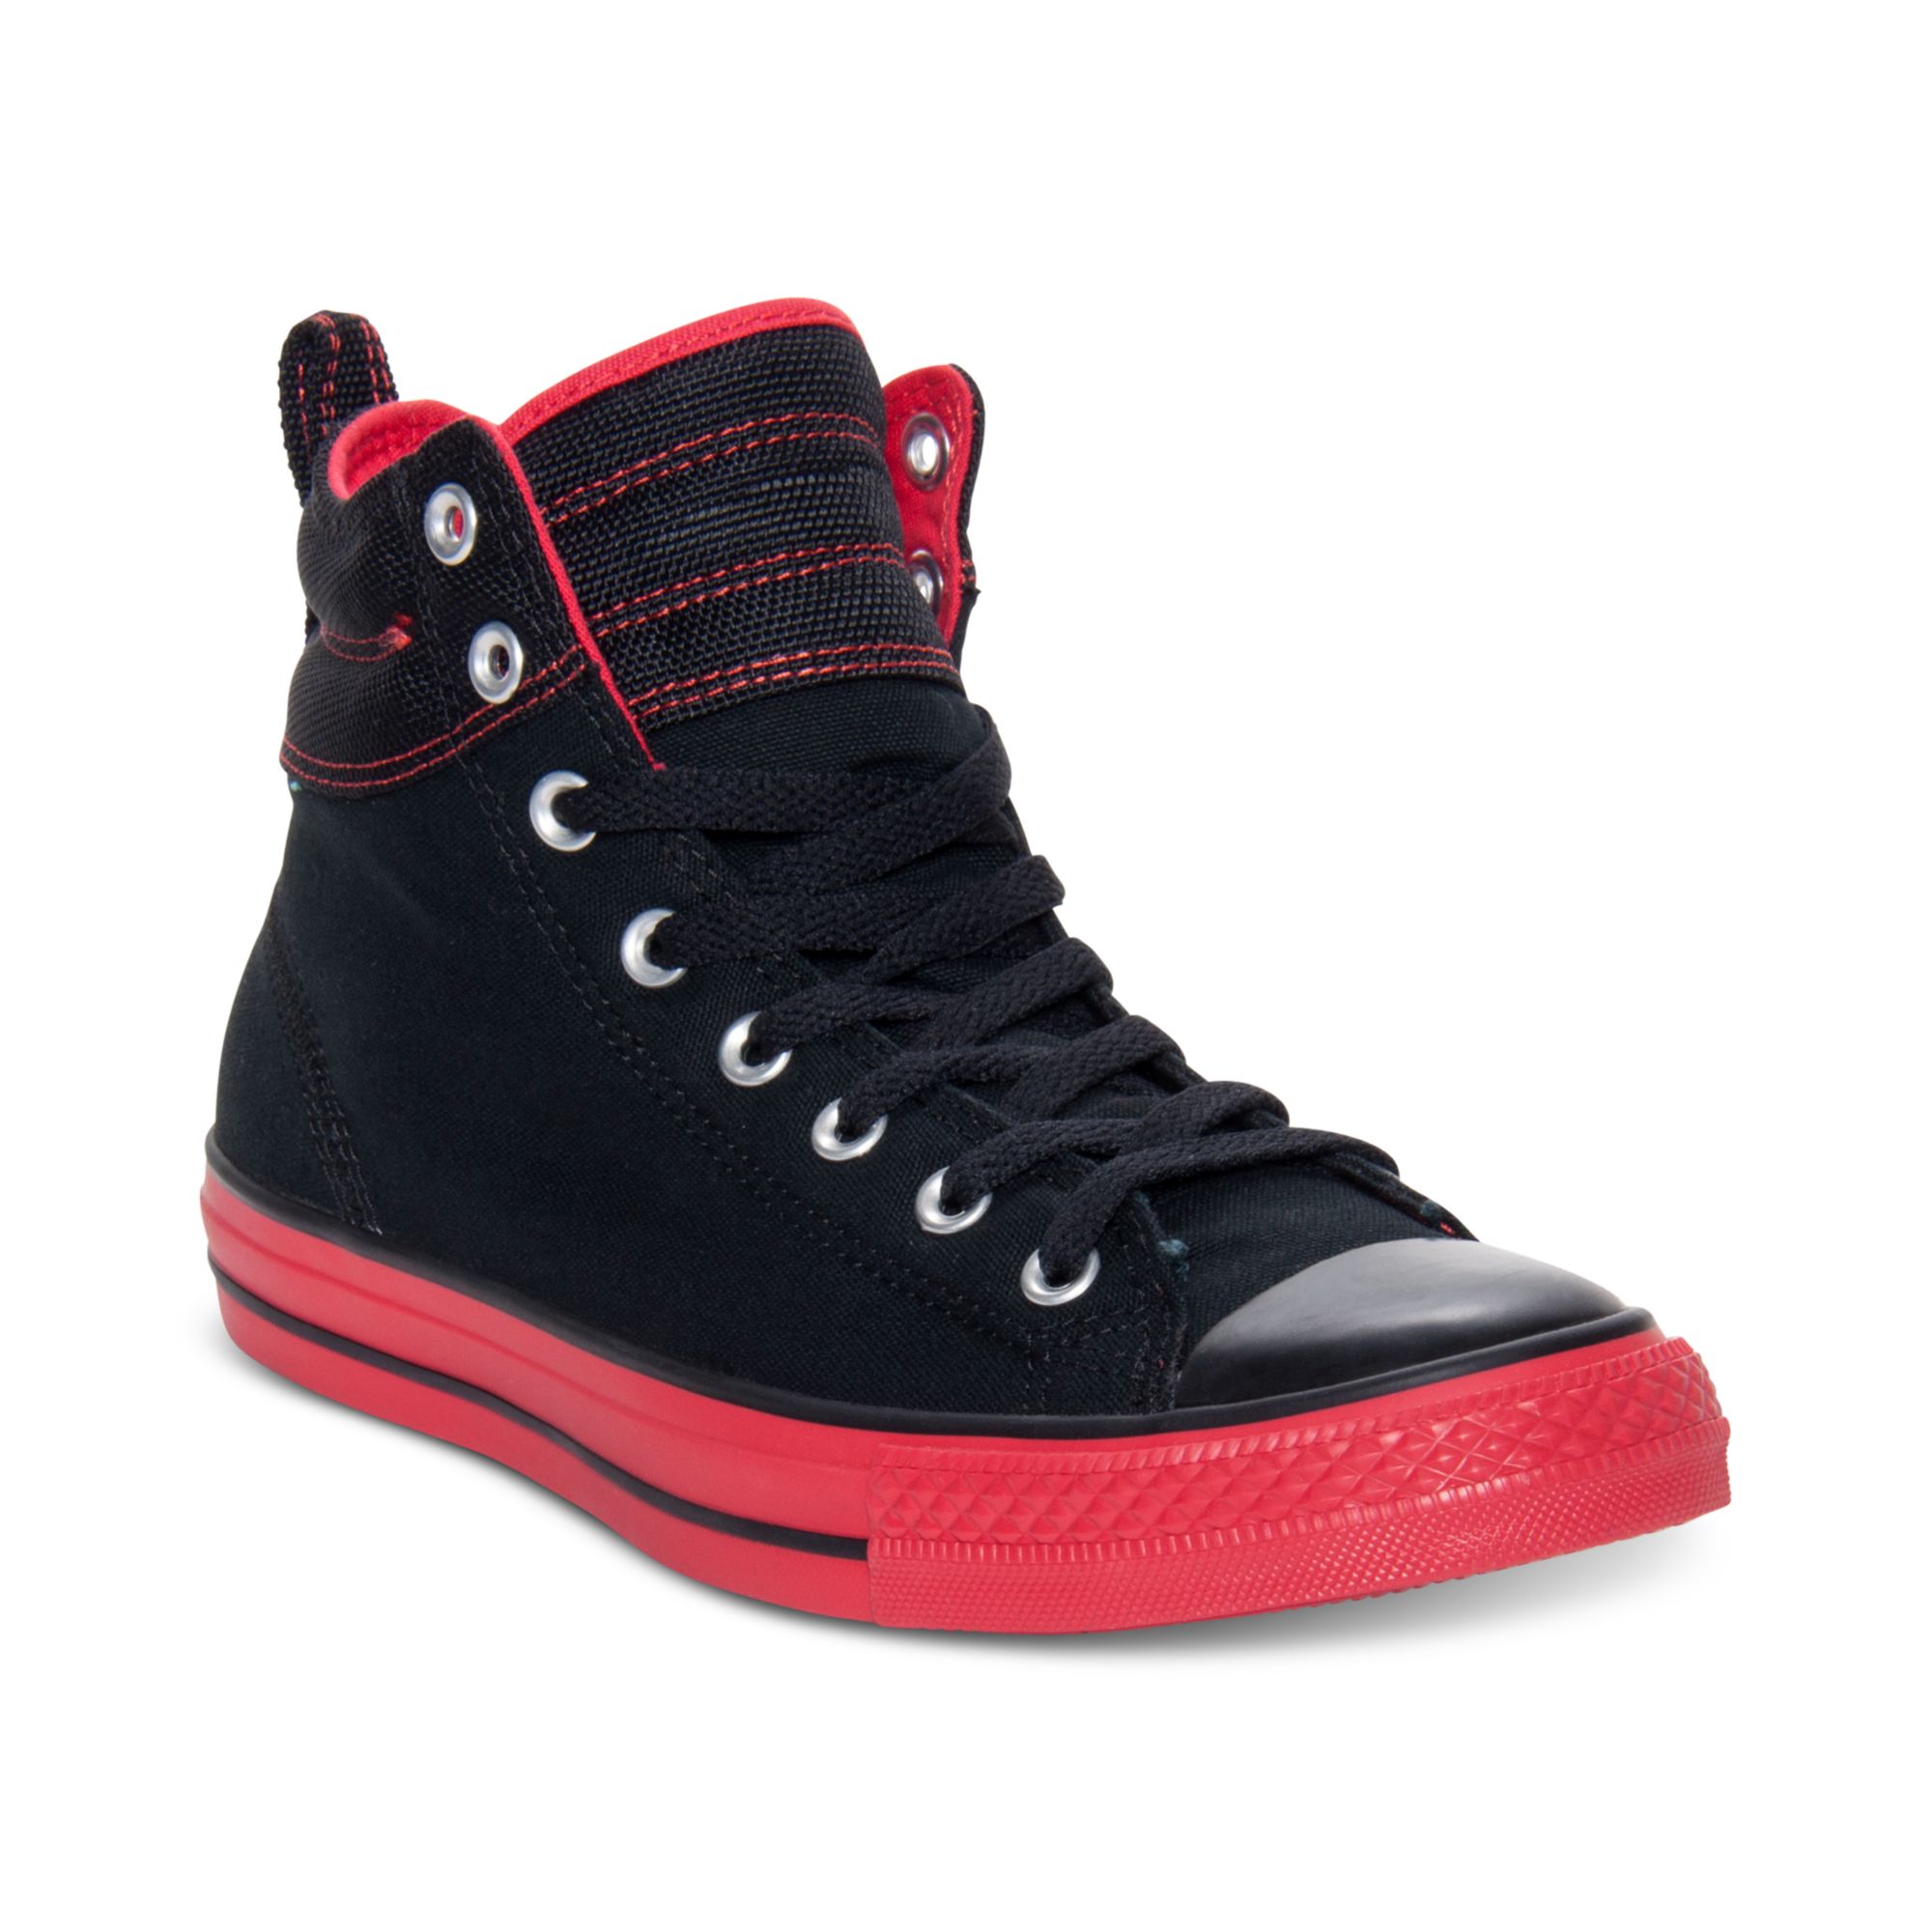 Converse Chuck Taylor Hi Top Sneakers in Black/Red (Black) for Men - Lyst